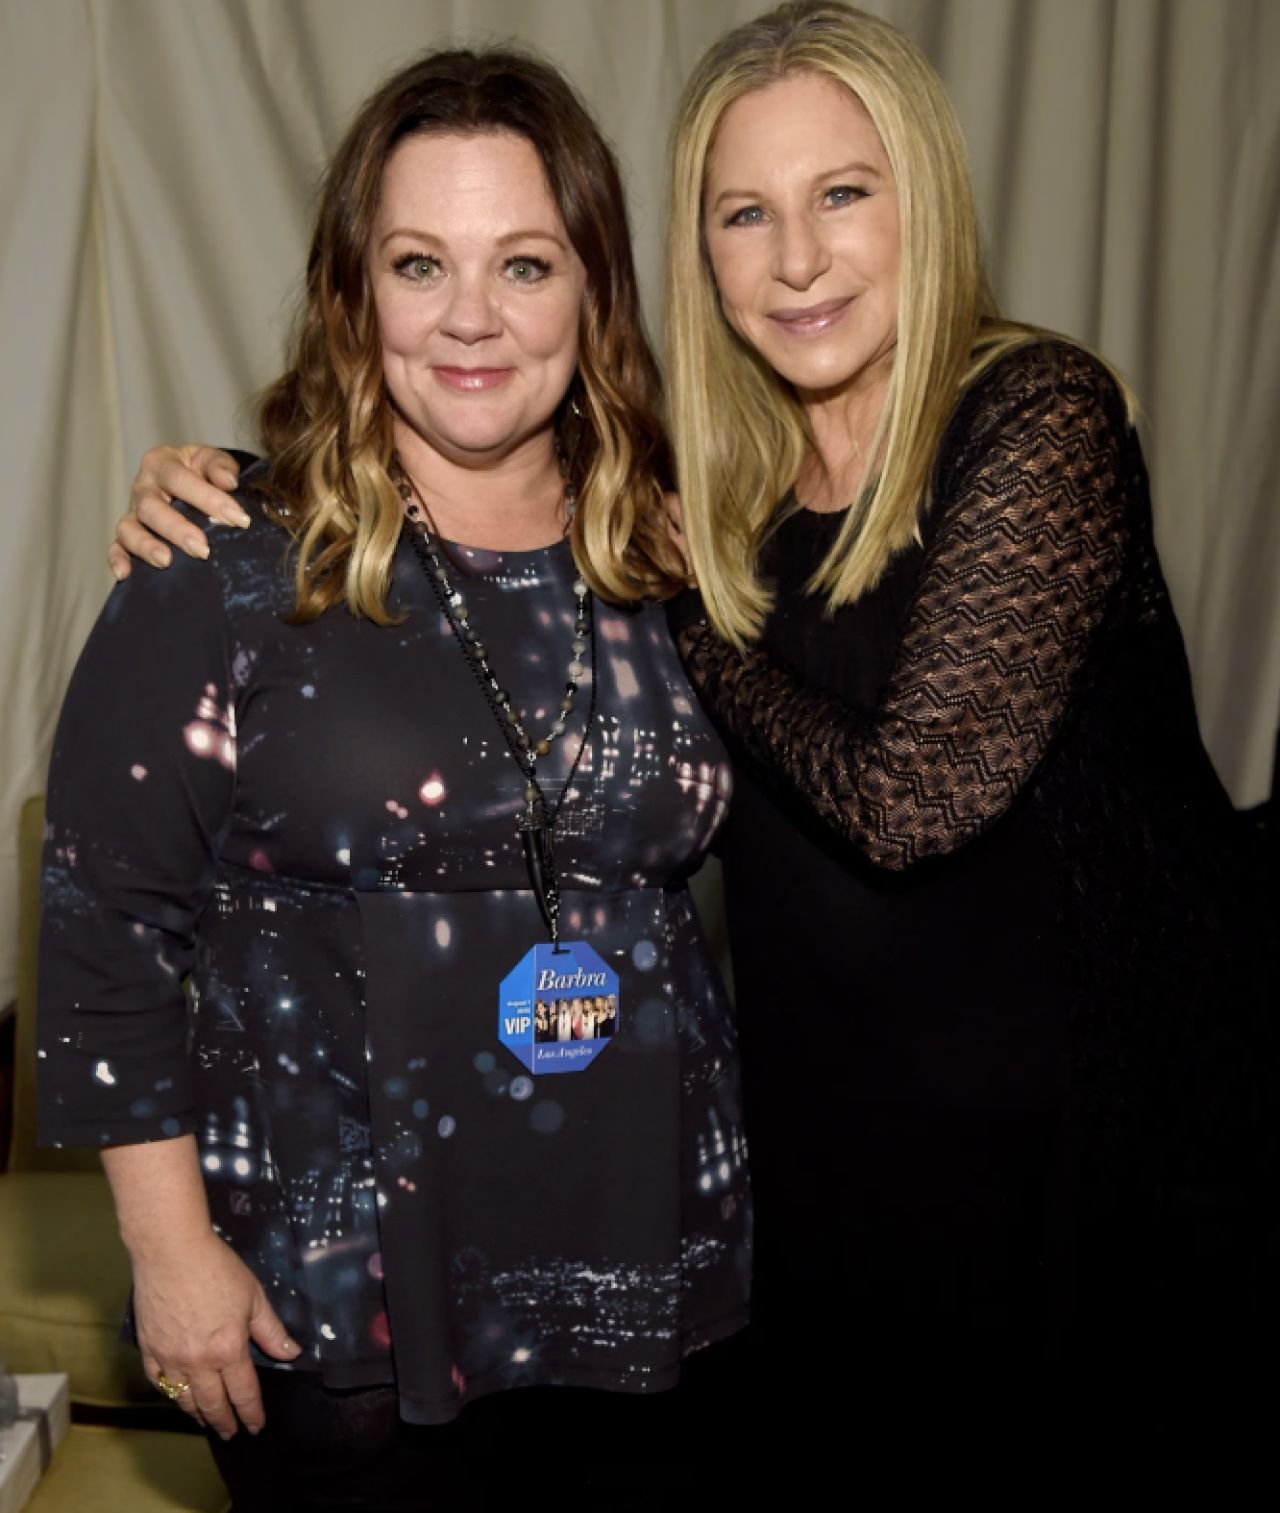 Weight, Shaming, and Social Media: Barbra Streisand&#039;s Comment on Melissa McCarthy&#039;s Post Sparks Debate